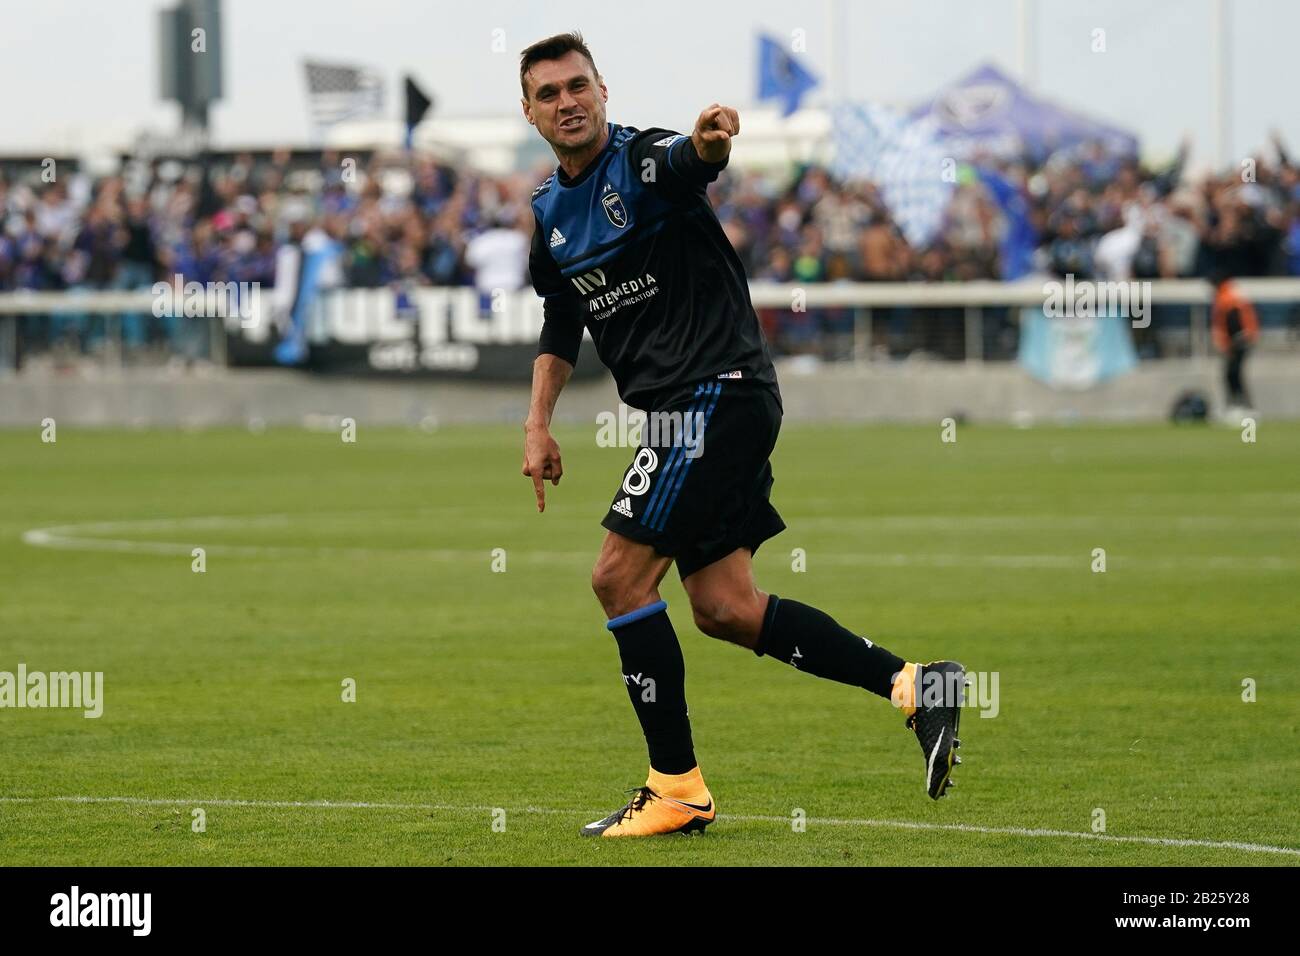 San Jose Earthquakes forward Chris Wondolowski (8) celebrates during the second half of the MLS soccer game against the Toronto FC, Saturday, Feb. 28, 2020, in San Jose, Calif. The San Jose Earthquakes and the Toronto FC tied the game 2-2. (Photo by IOS/ESPA-Images) Stock Photo